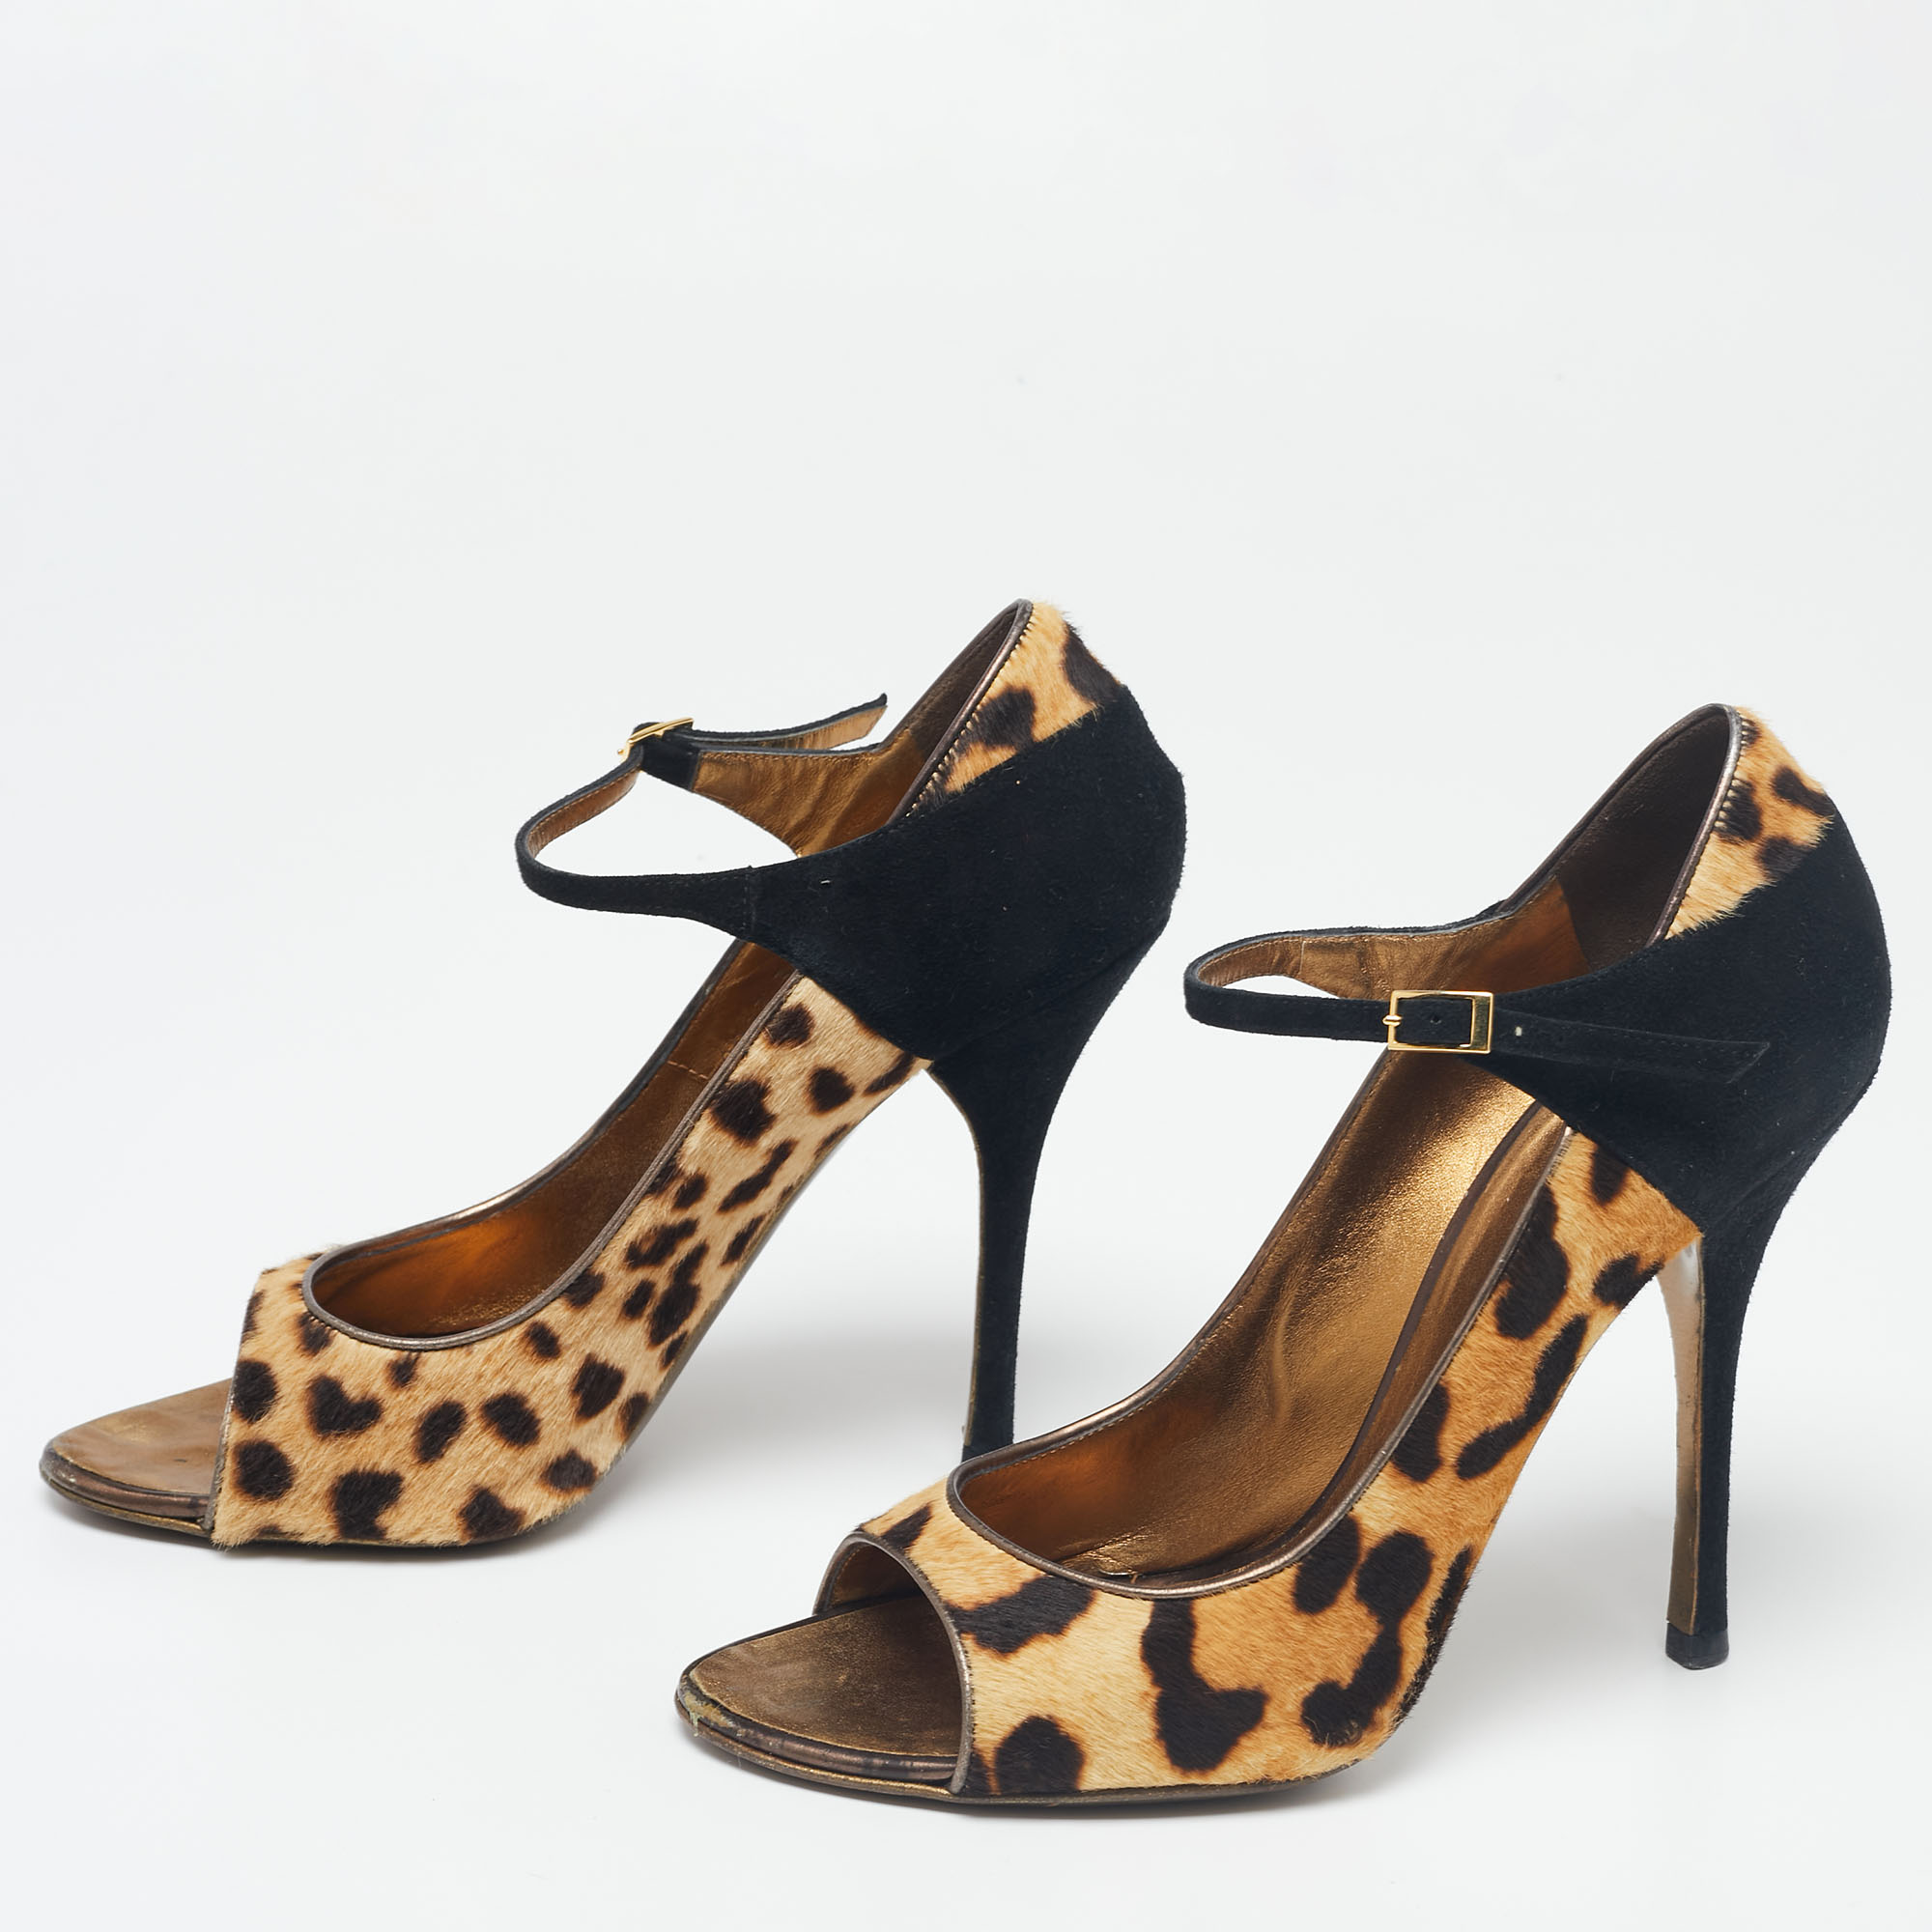 

Roberto Cavalli Black/Beige Suede And Calf Hair Leopard Print Mary Jane Open Toe Pumps Size